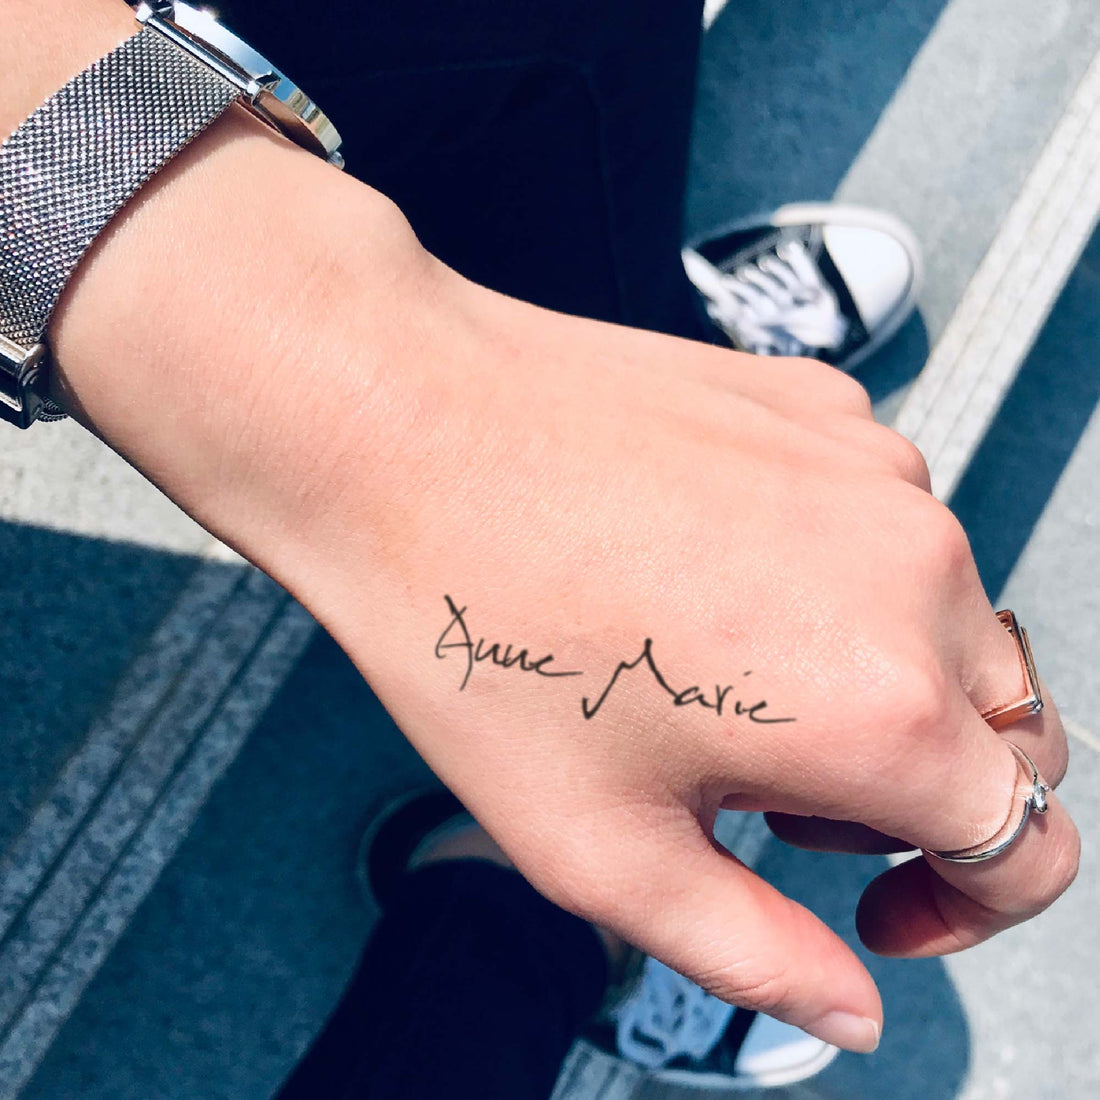 Anne Marie custom temporary tattoo sticker design idea inspiration meanings removal arm wrist hand words font name signature calligraphy lyrics tour concert outfits merch accessory gift souvenir costumes wear dress up code